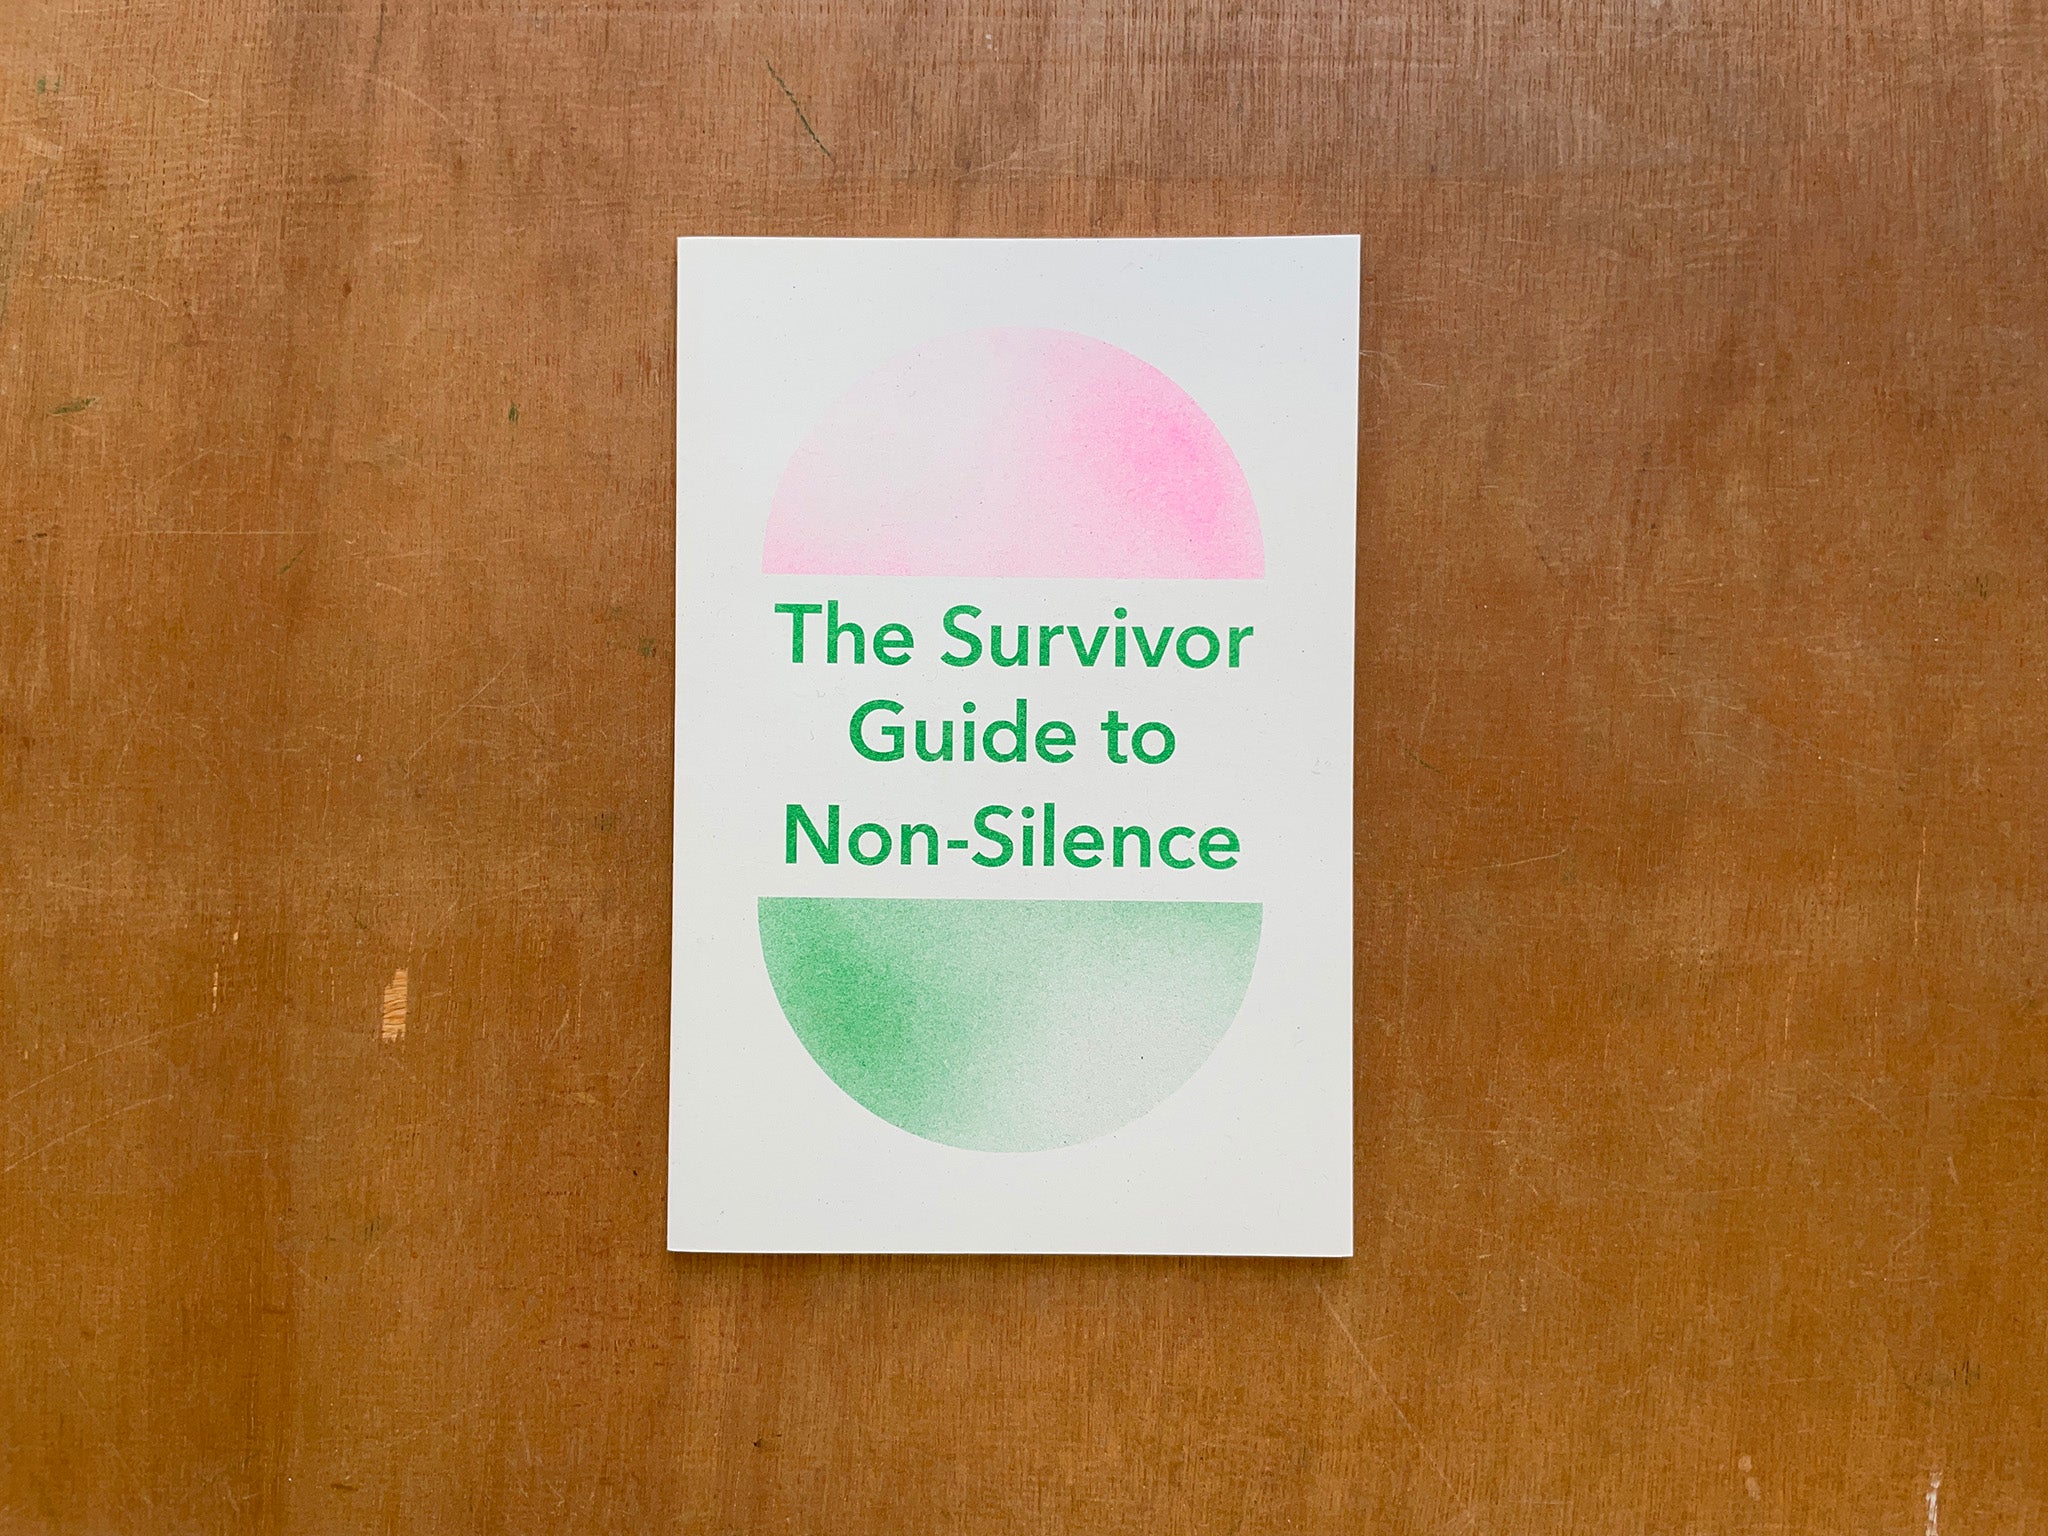 THE SURVIVOR GUIDE TO NON-SILENCE by Various Artists